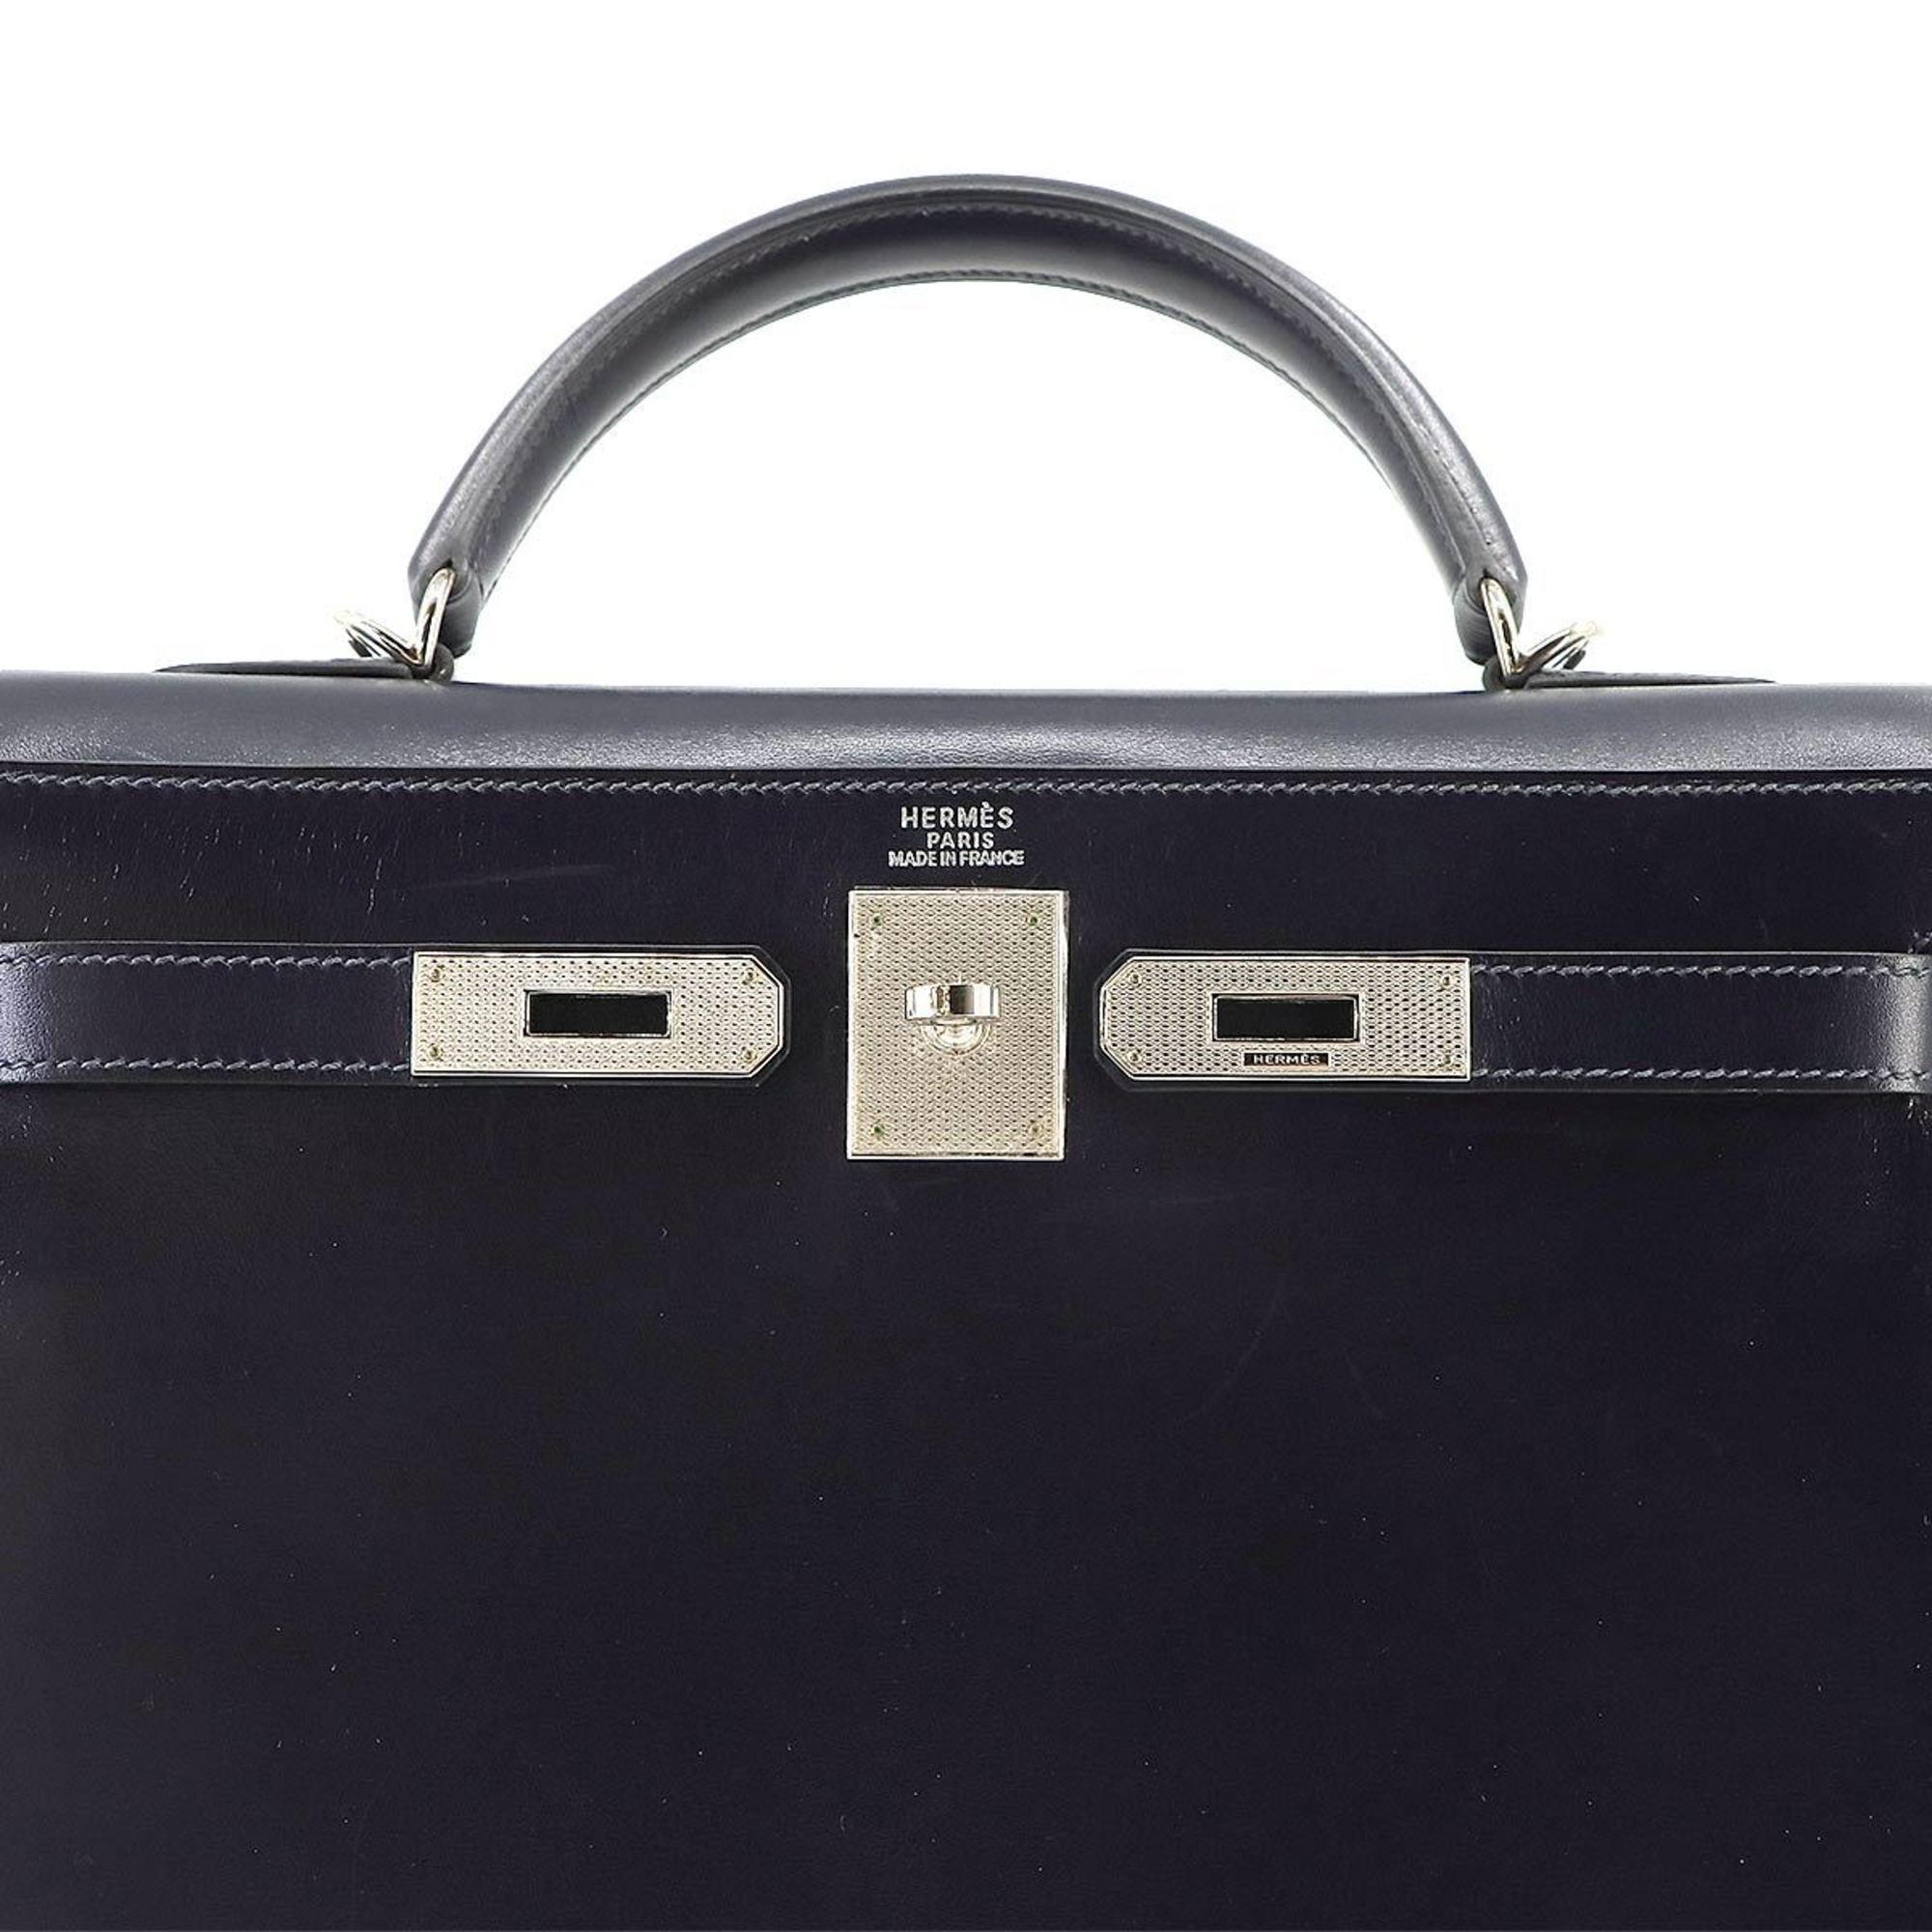 Hermes Kelly 32 2way hand shoulder bag, box calf, blue marine, G stamp, outside stitching, guilloche, silver hardware,